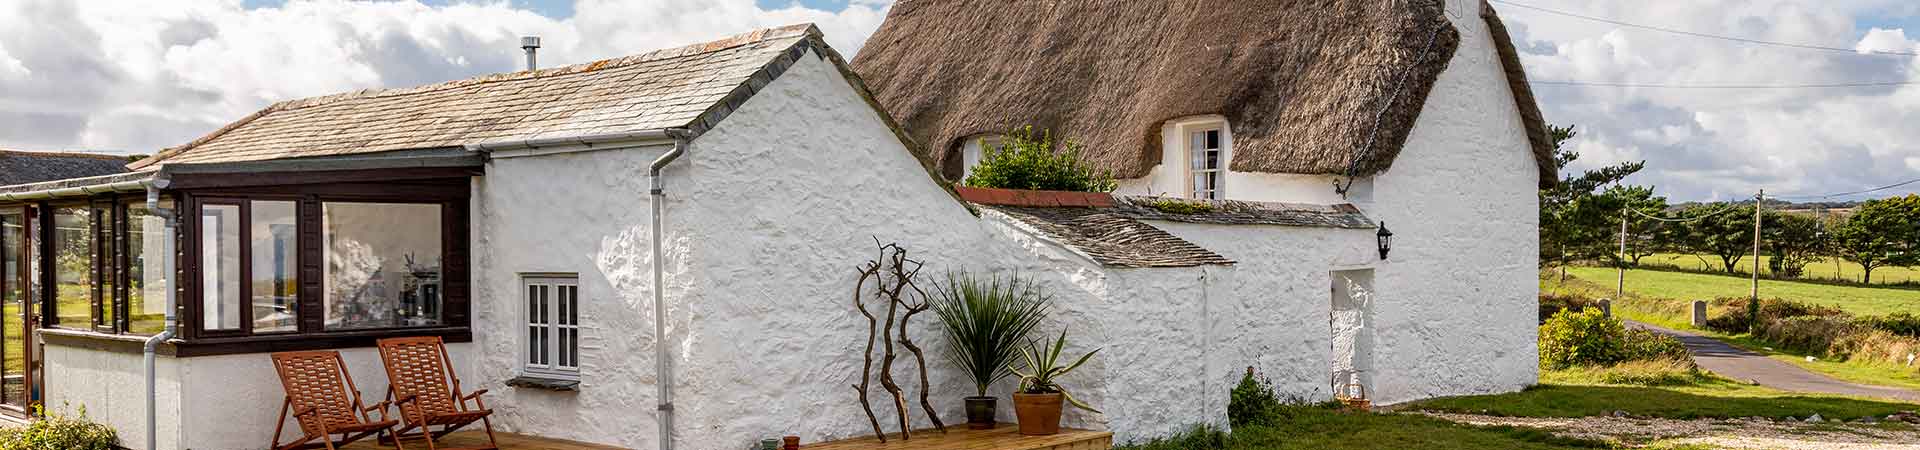 Thatched holiday cottages in North Yorkshire